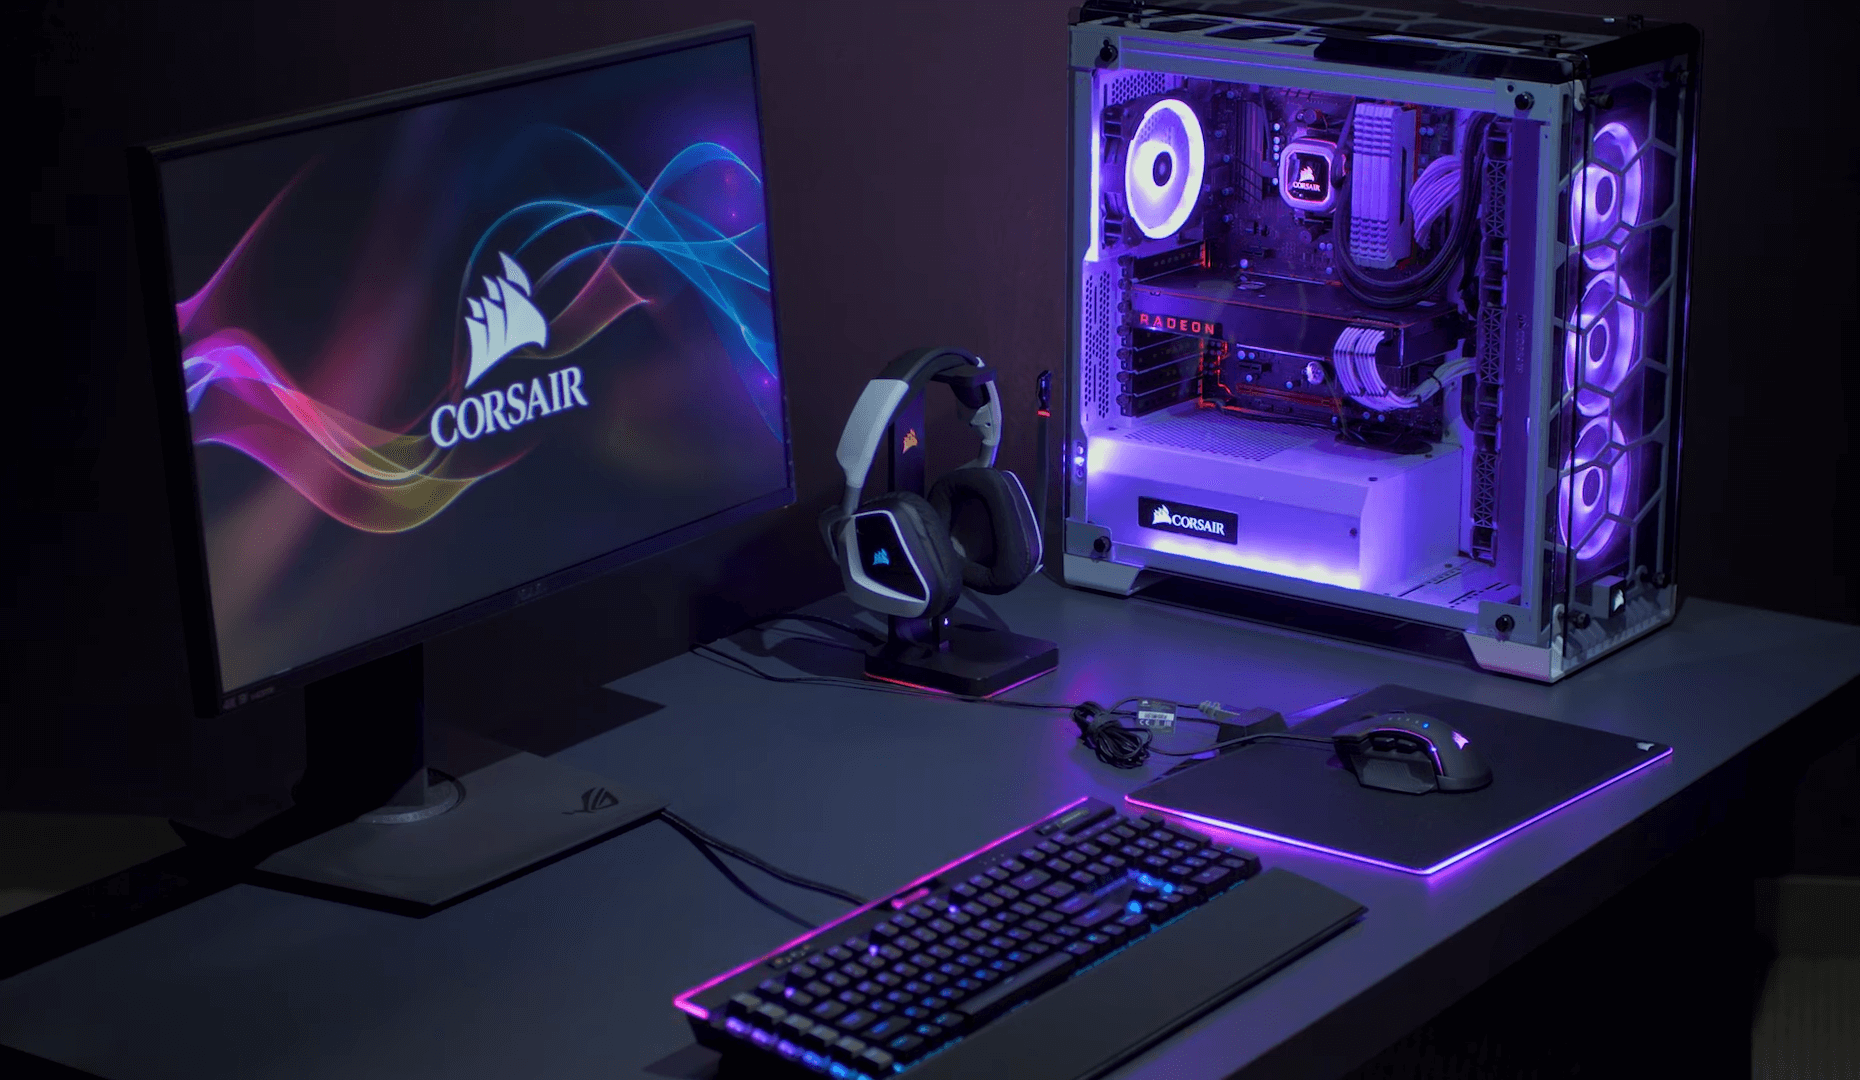 Get ready for your next epic battle with Corsair